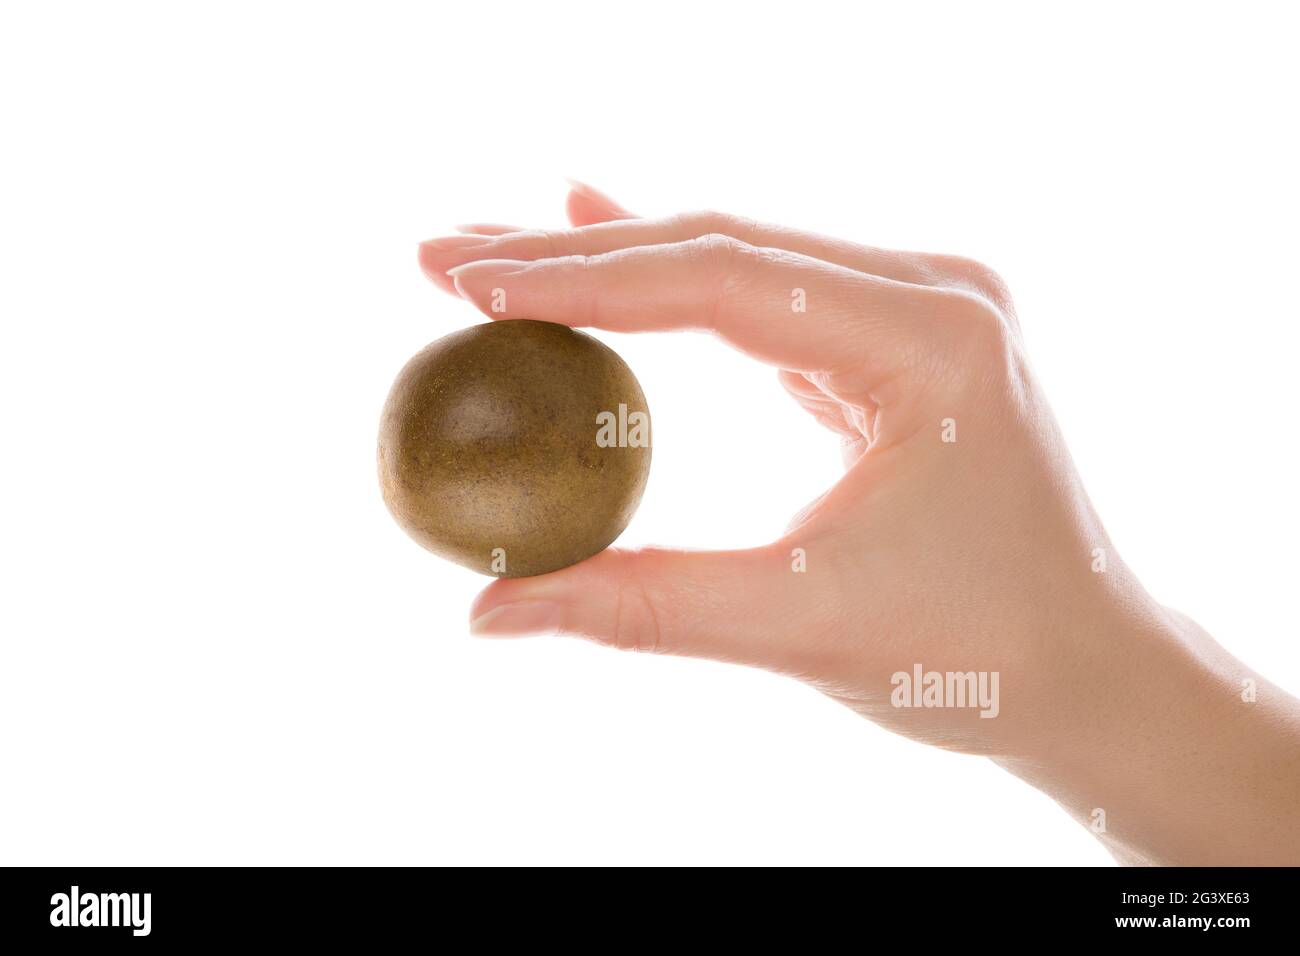 Holding monk fruit in hand. Stock Photo